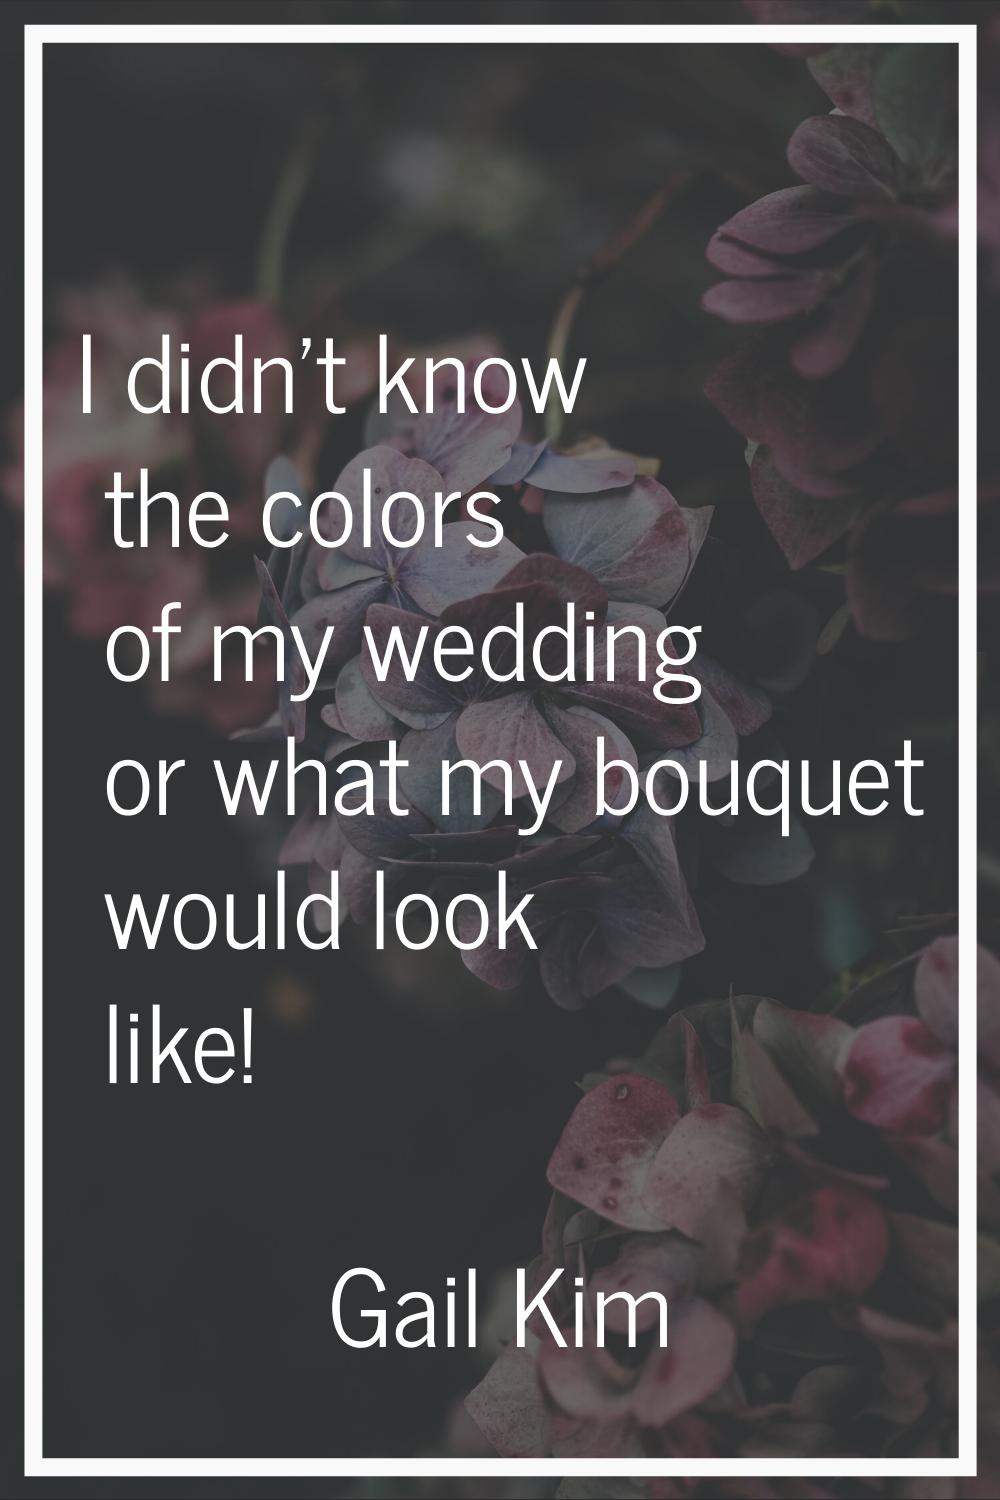 I didn't know the colors of my wedding or what my bouquet would look like!